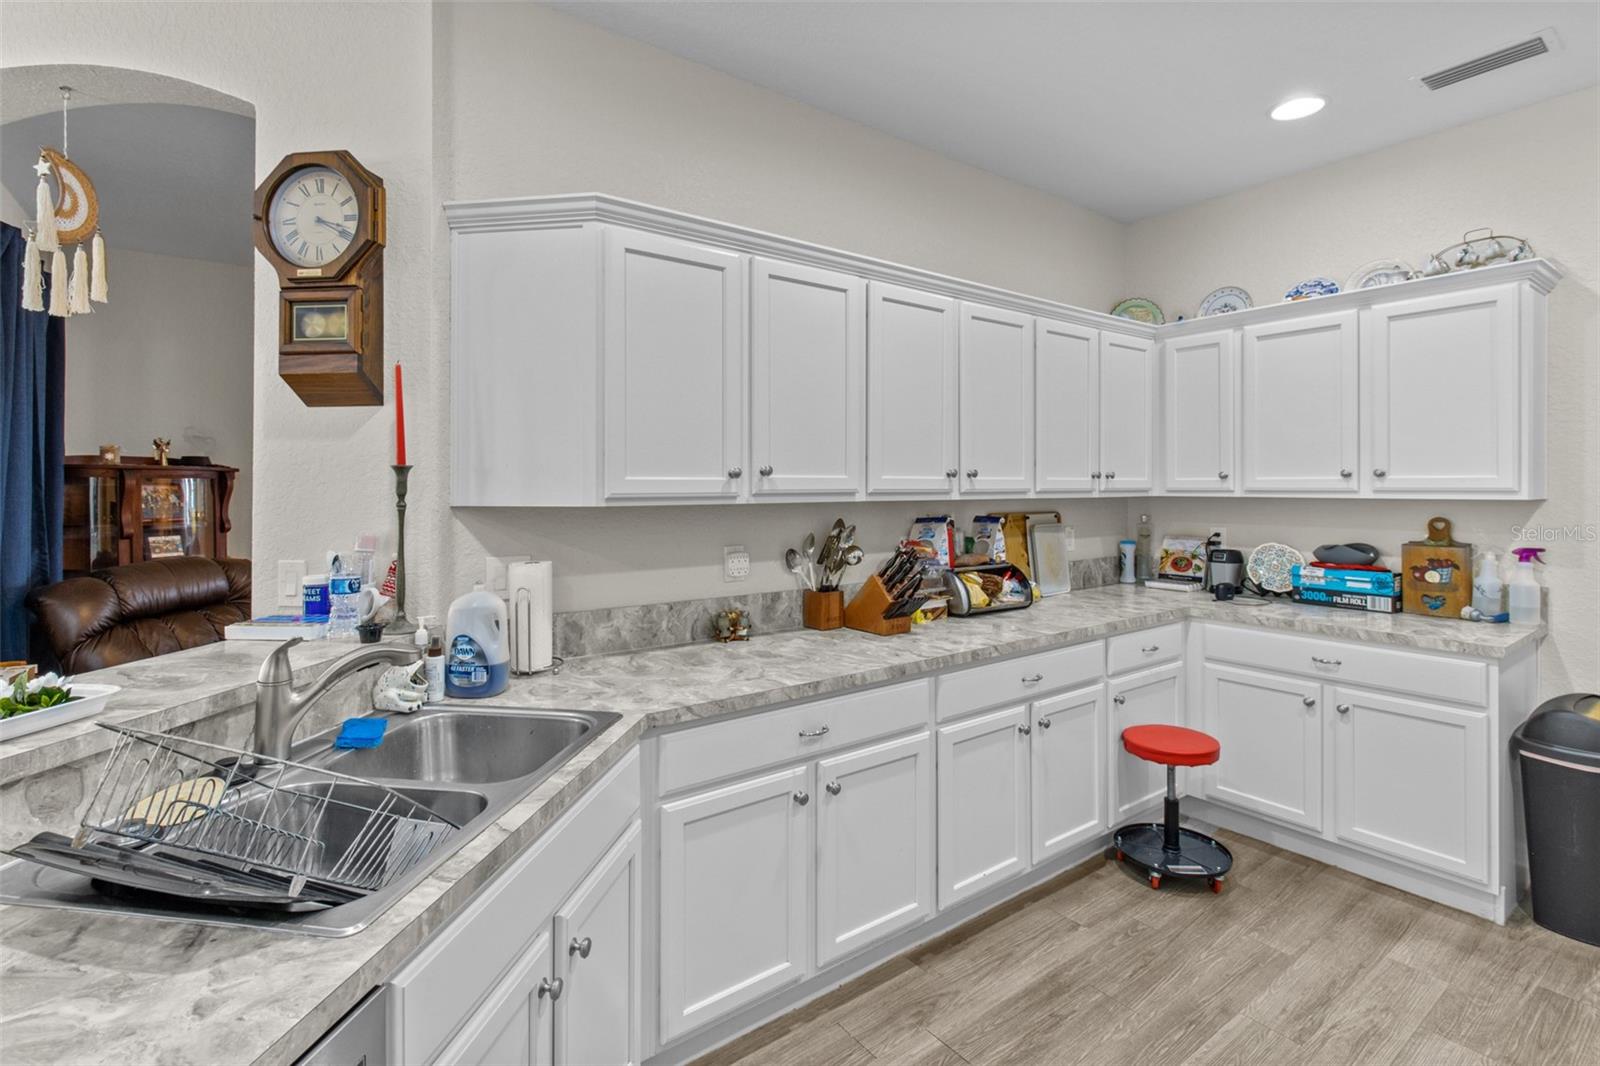 This kitchen boasts plenty of counter and storage space!